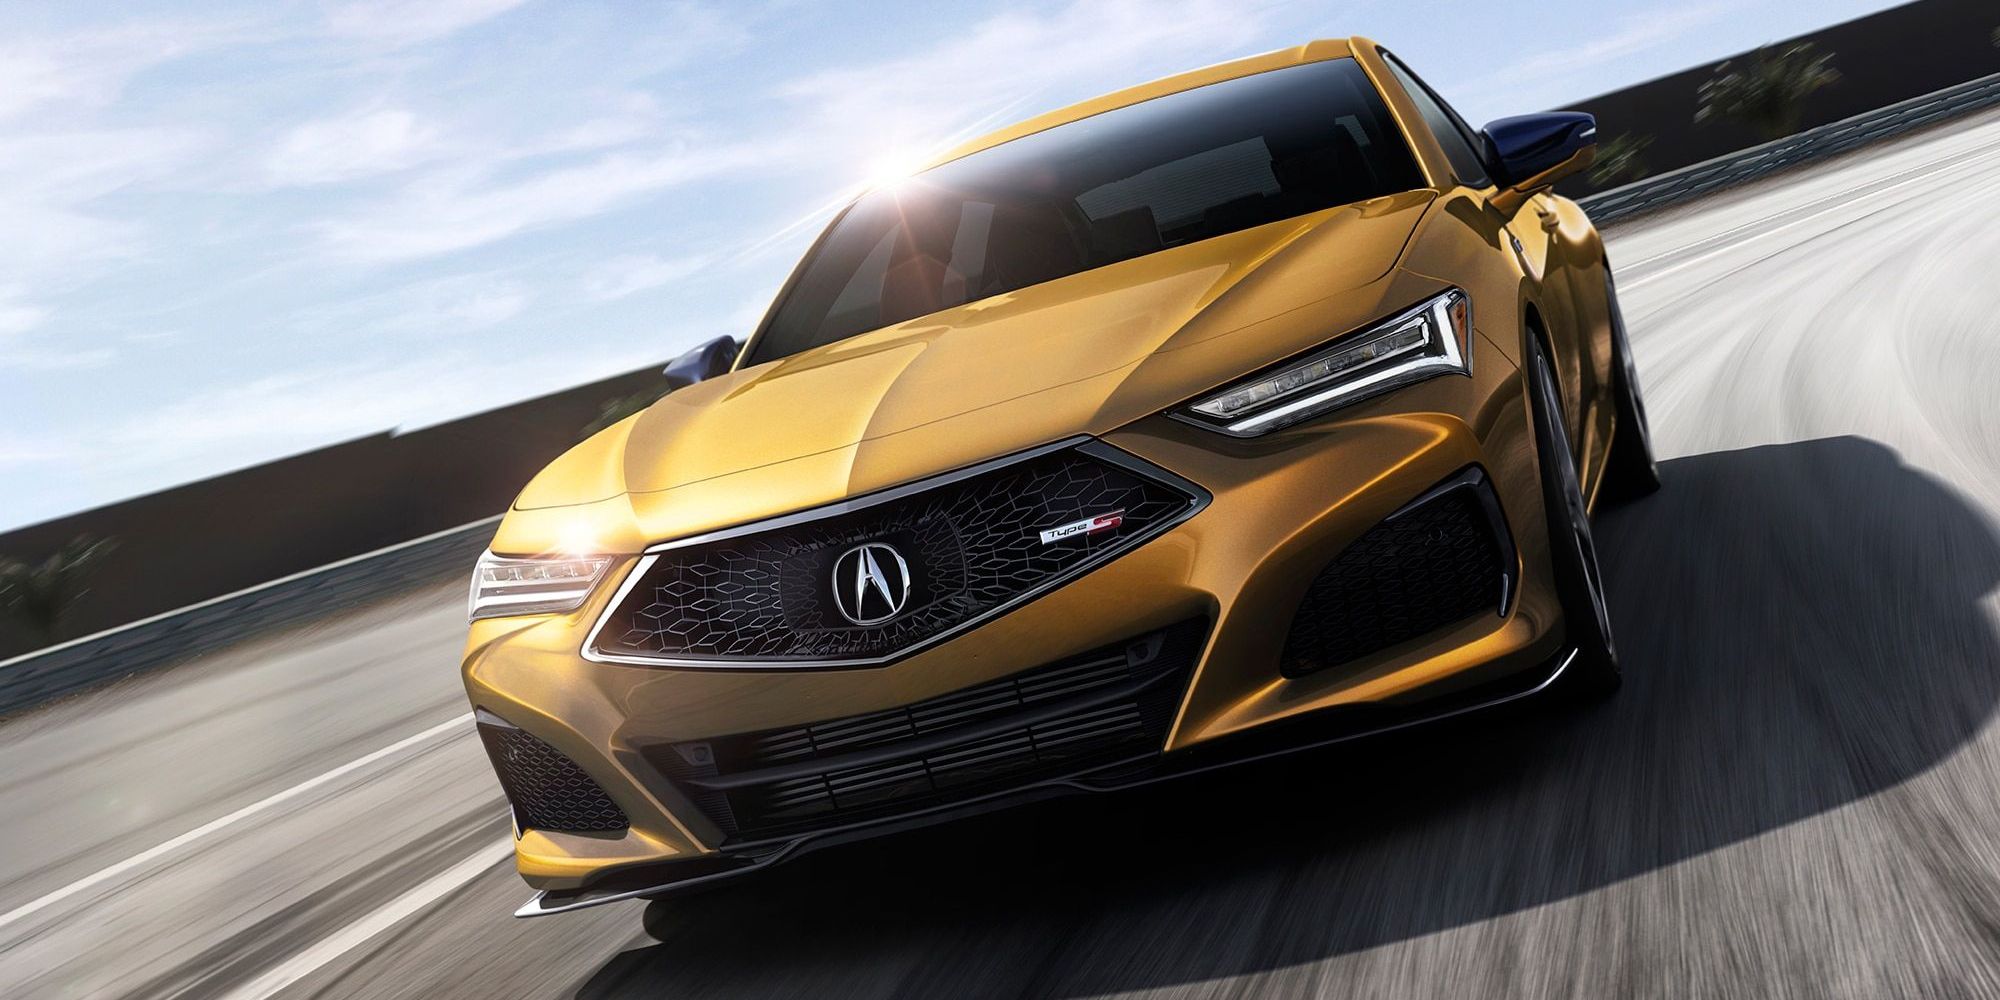 The TLX Type S in yellow